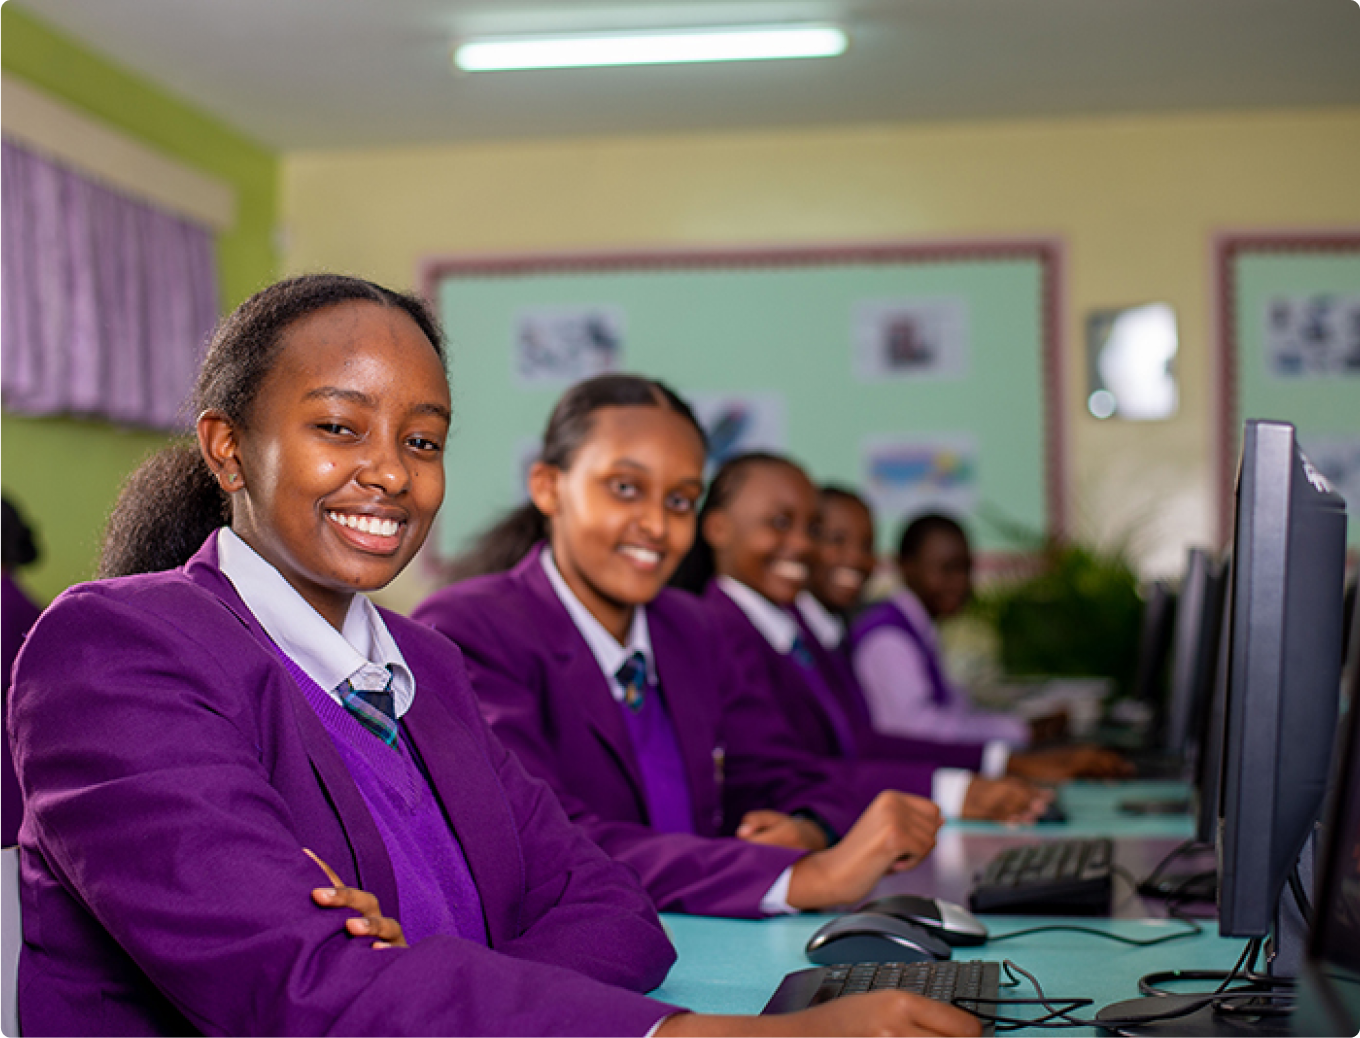 Riara Springs Girls High School students in the computer lab